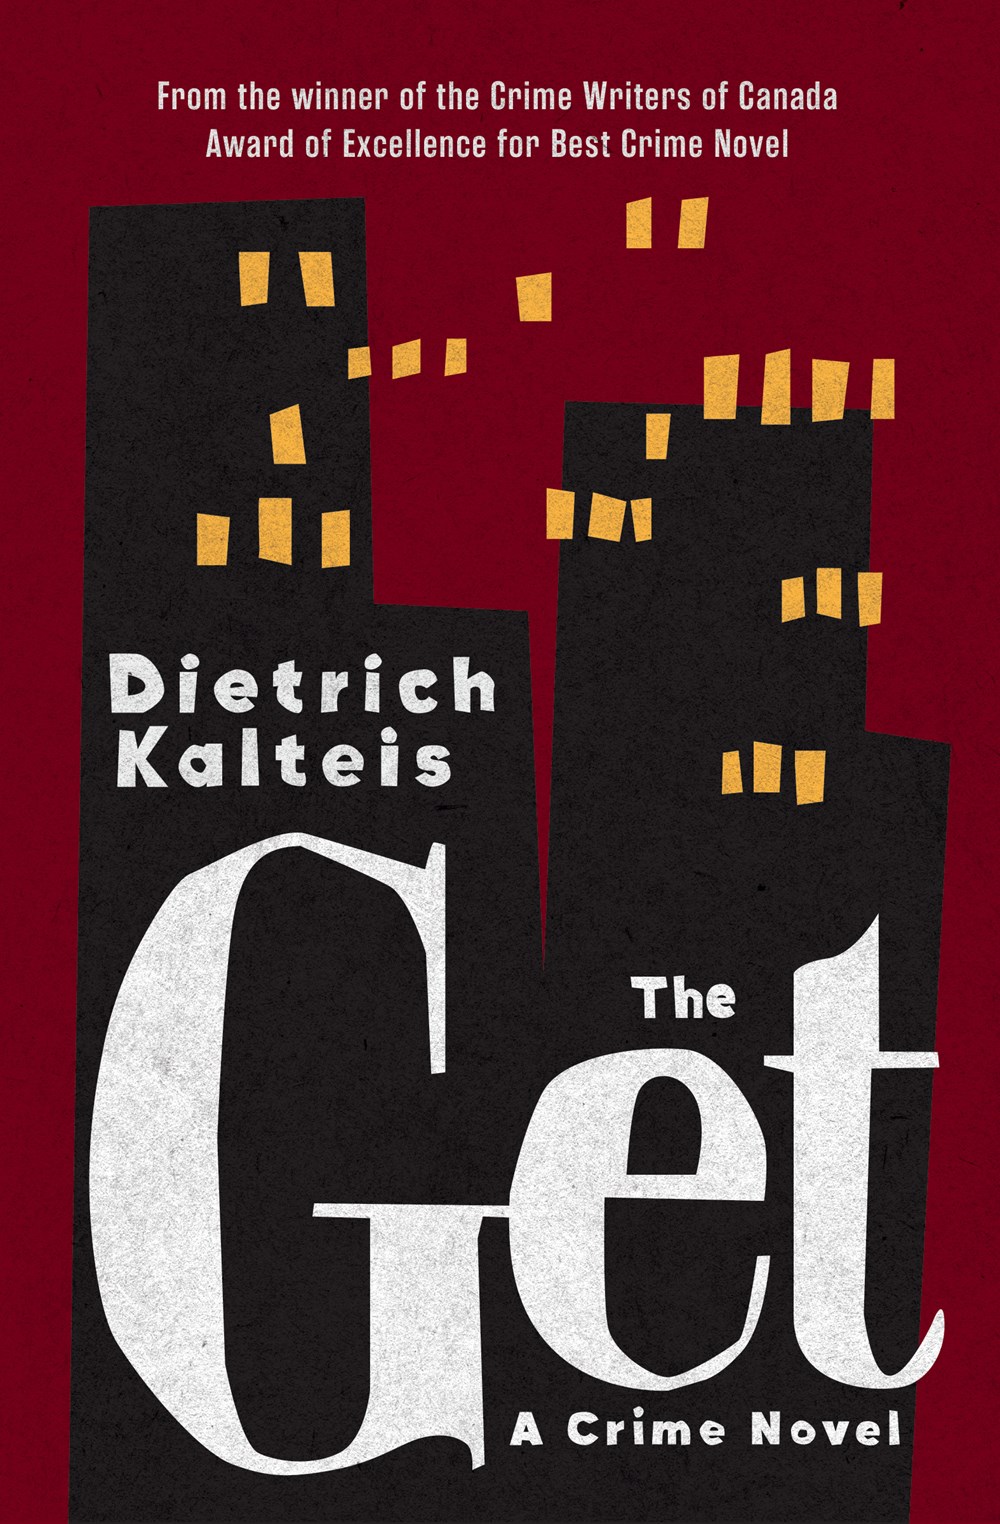 The book cover of Dietrich Kalteis' The Get